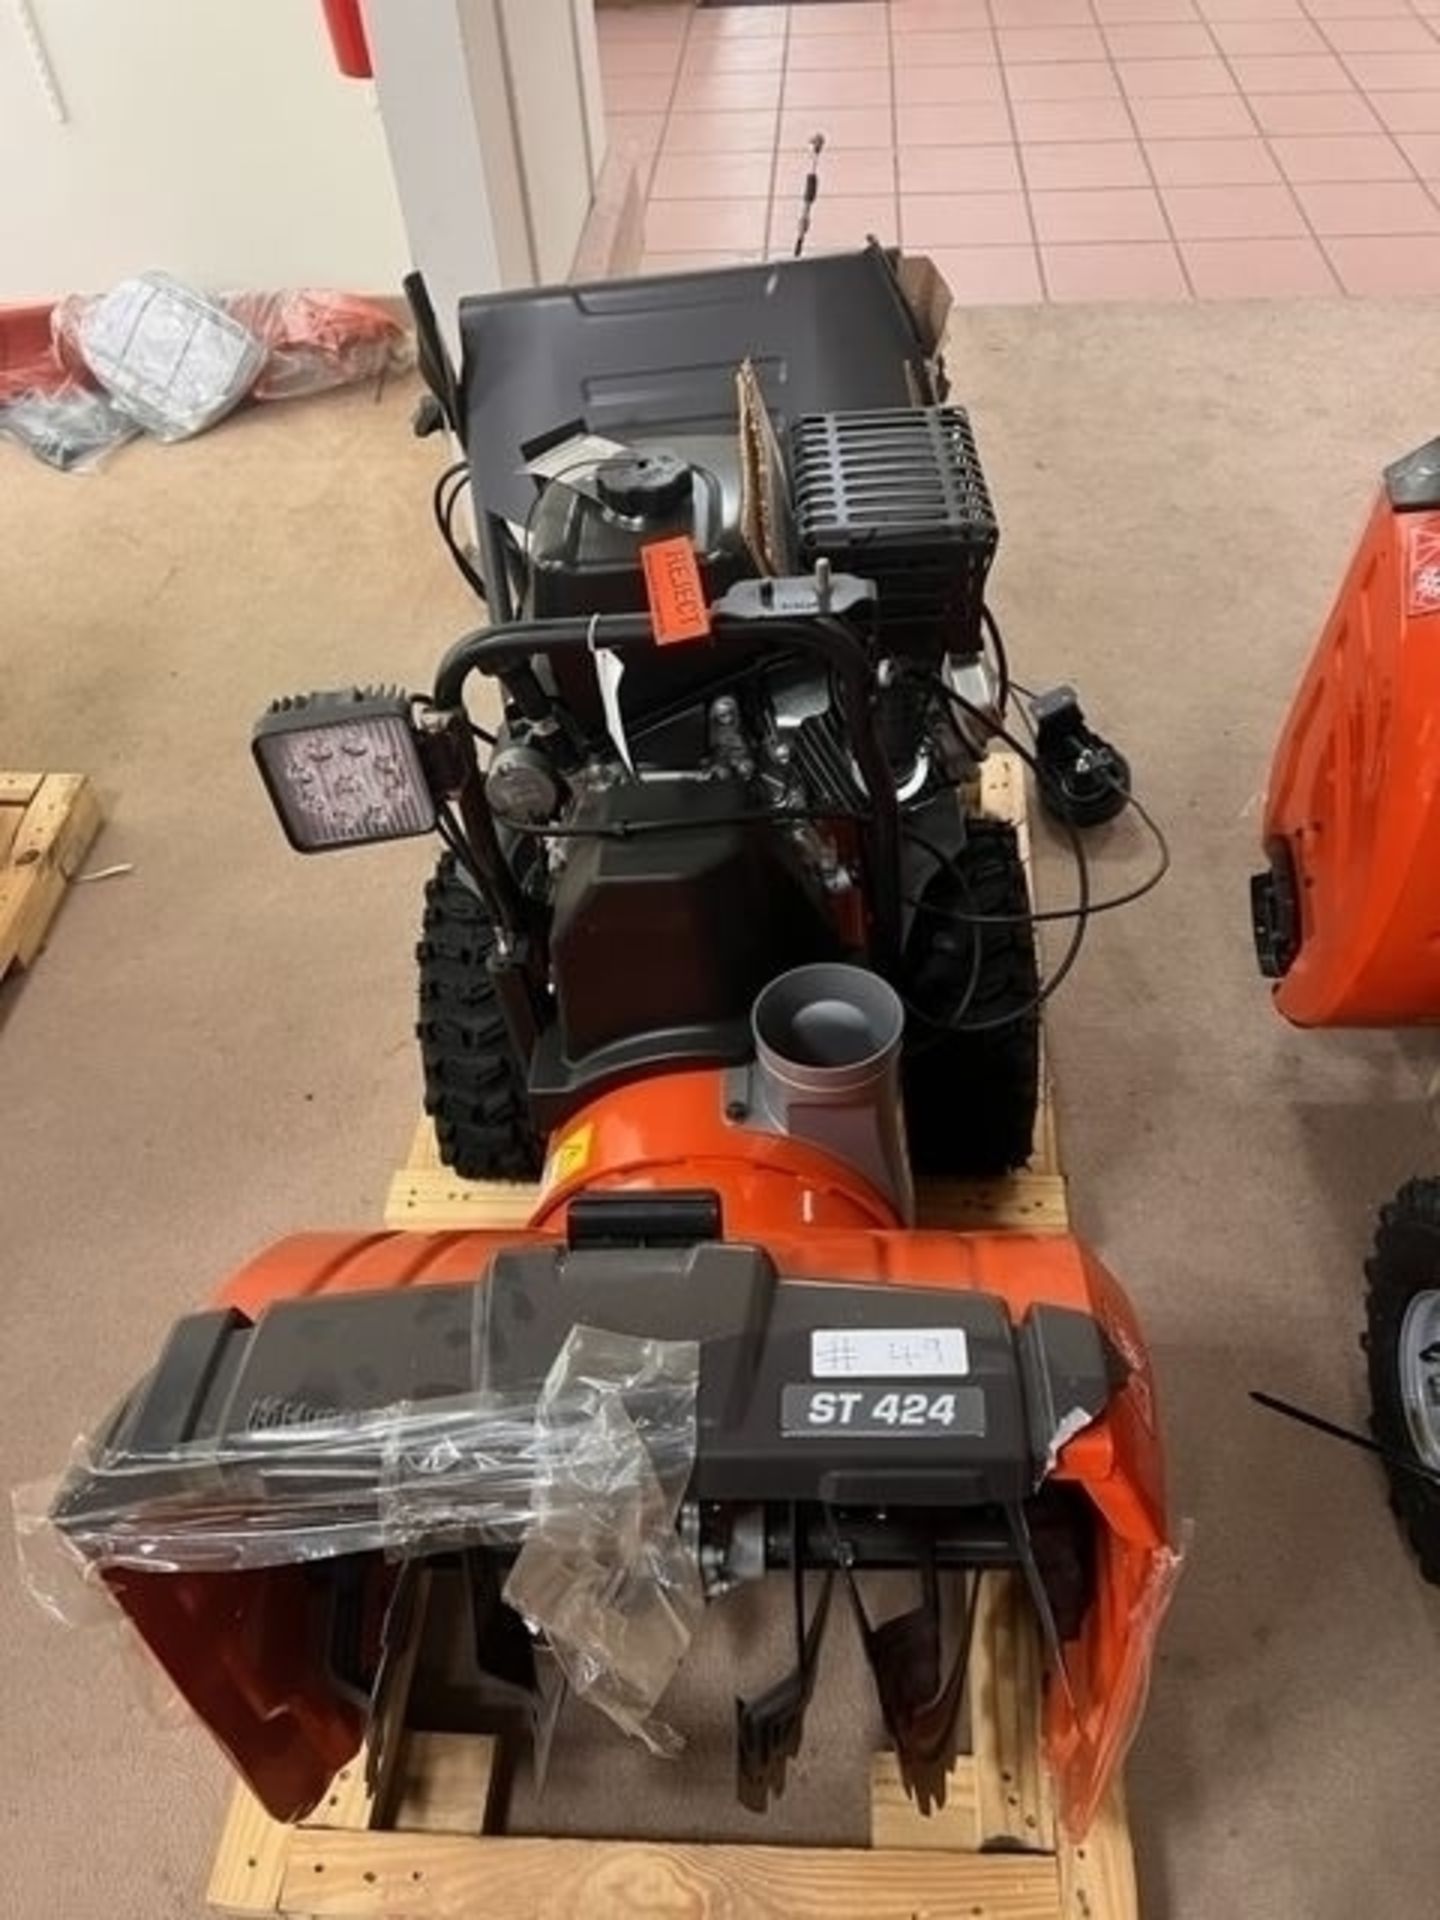 Husqvarna ST 424 Self Propelled Snow Blower - Approx. MSRP $2299 - Image 4 of 5